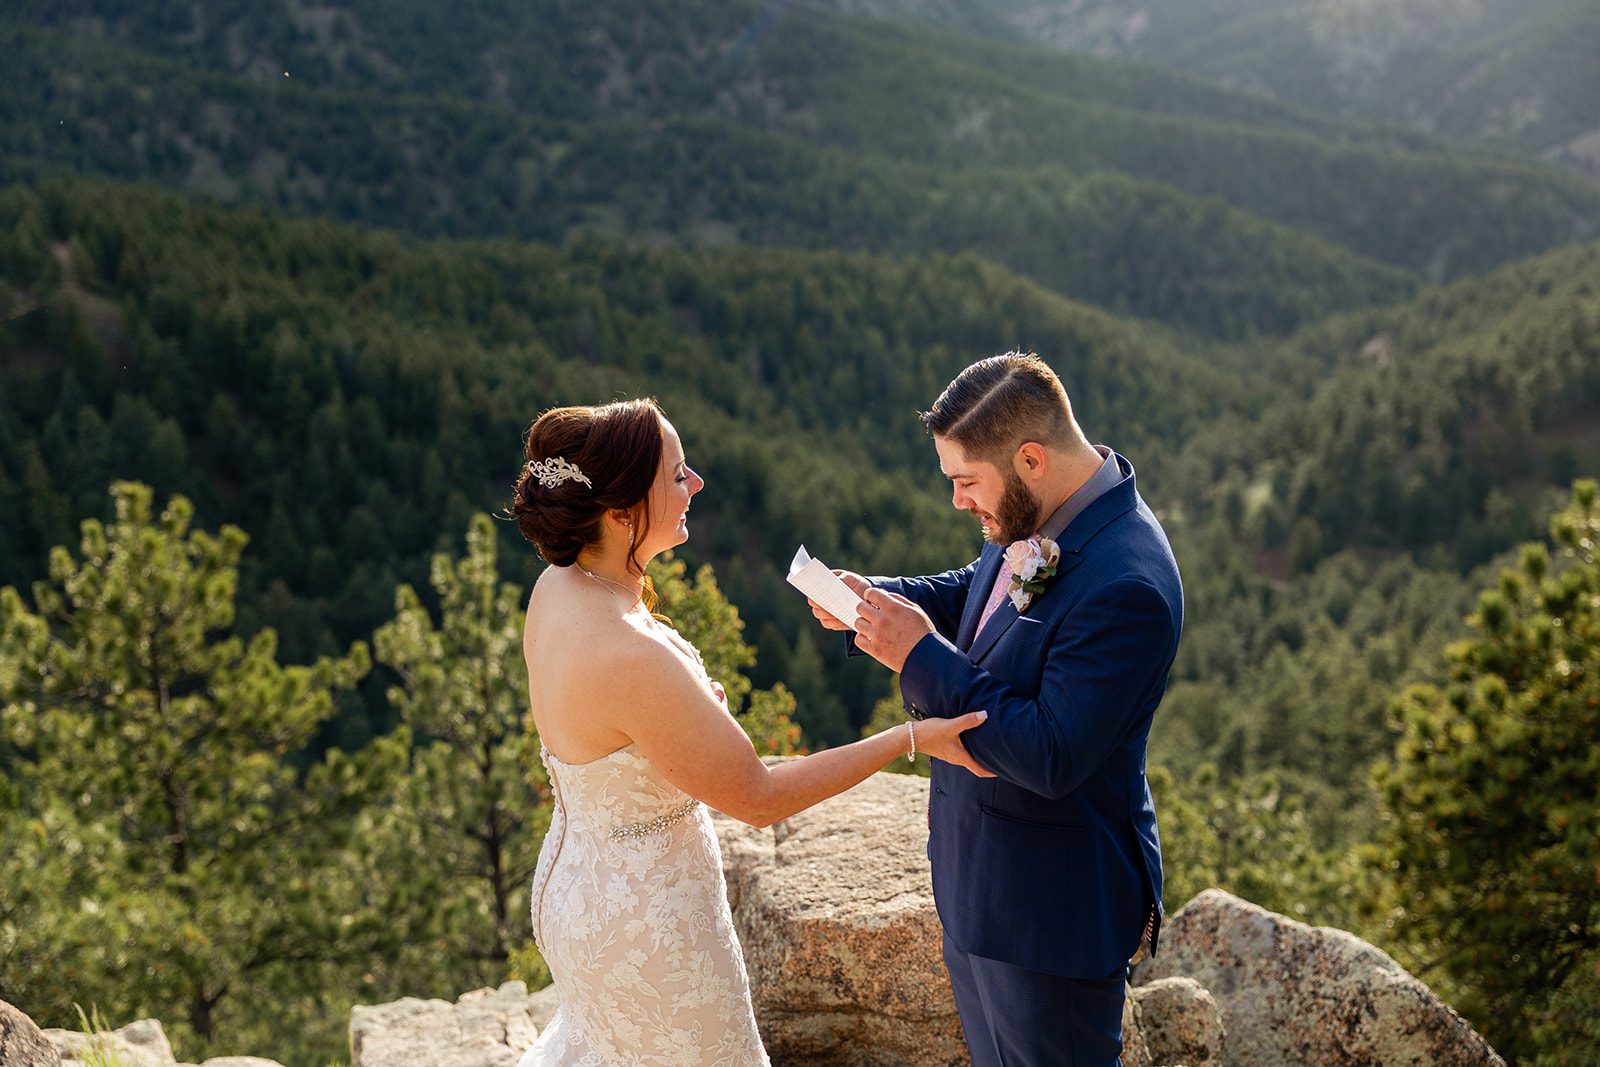 Groom reads his vow during their  their Boulder elopement ceremony with videography.